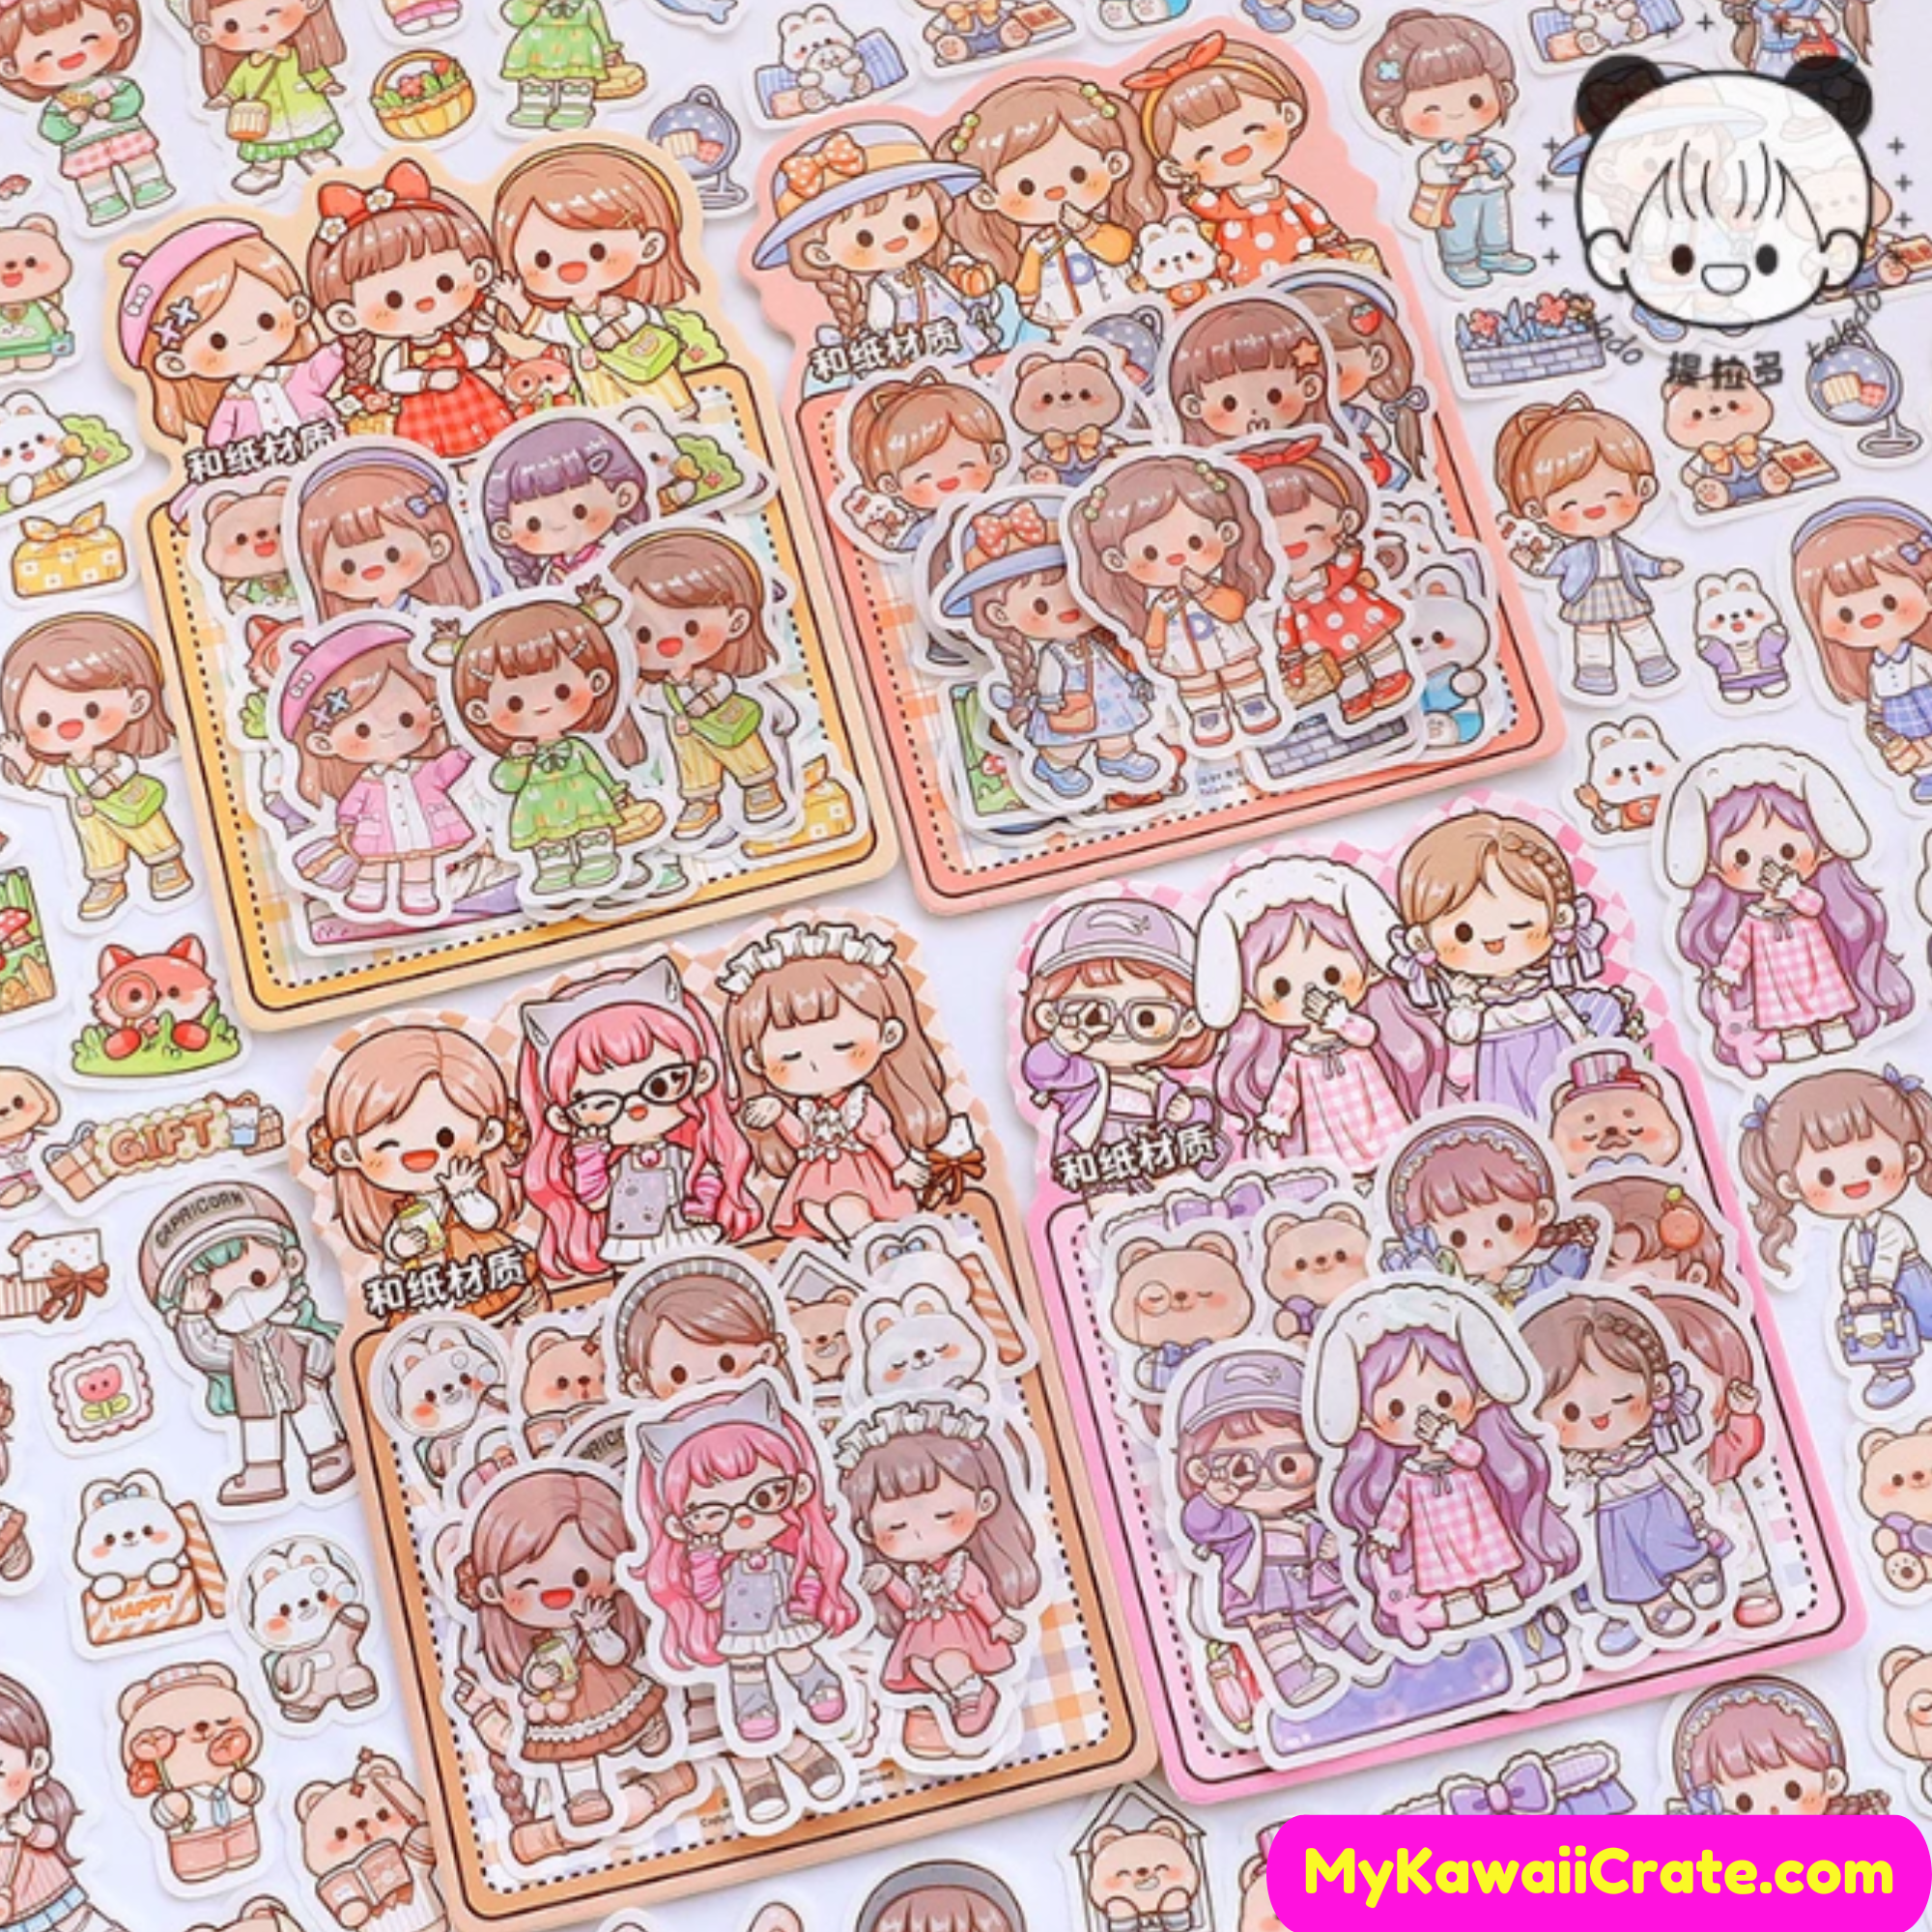 Cute Stickers Kawaii Stickers Small Stickers Girl Stickers